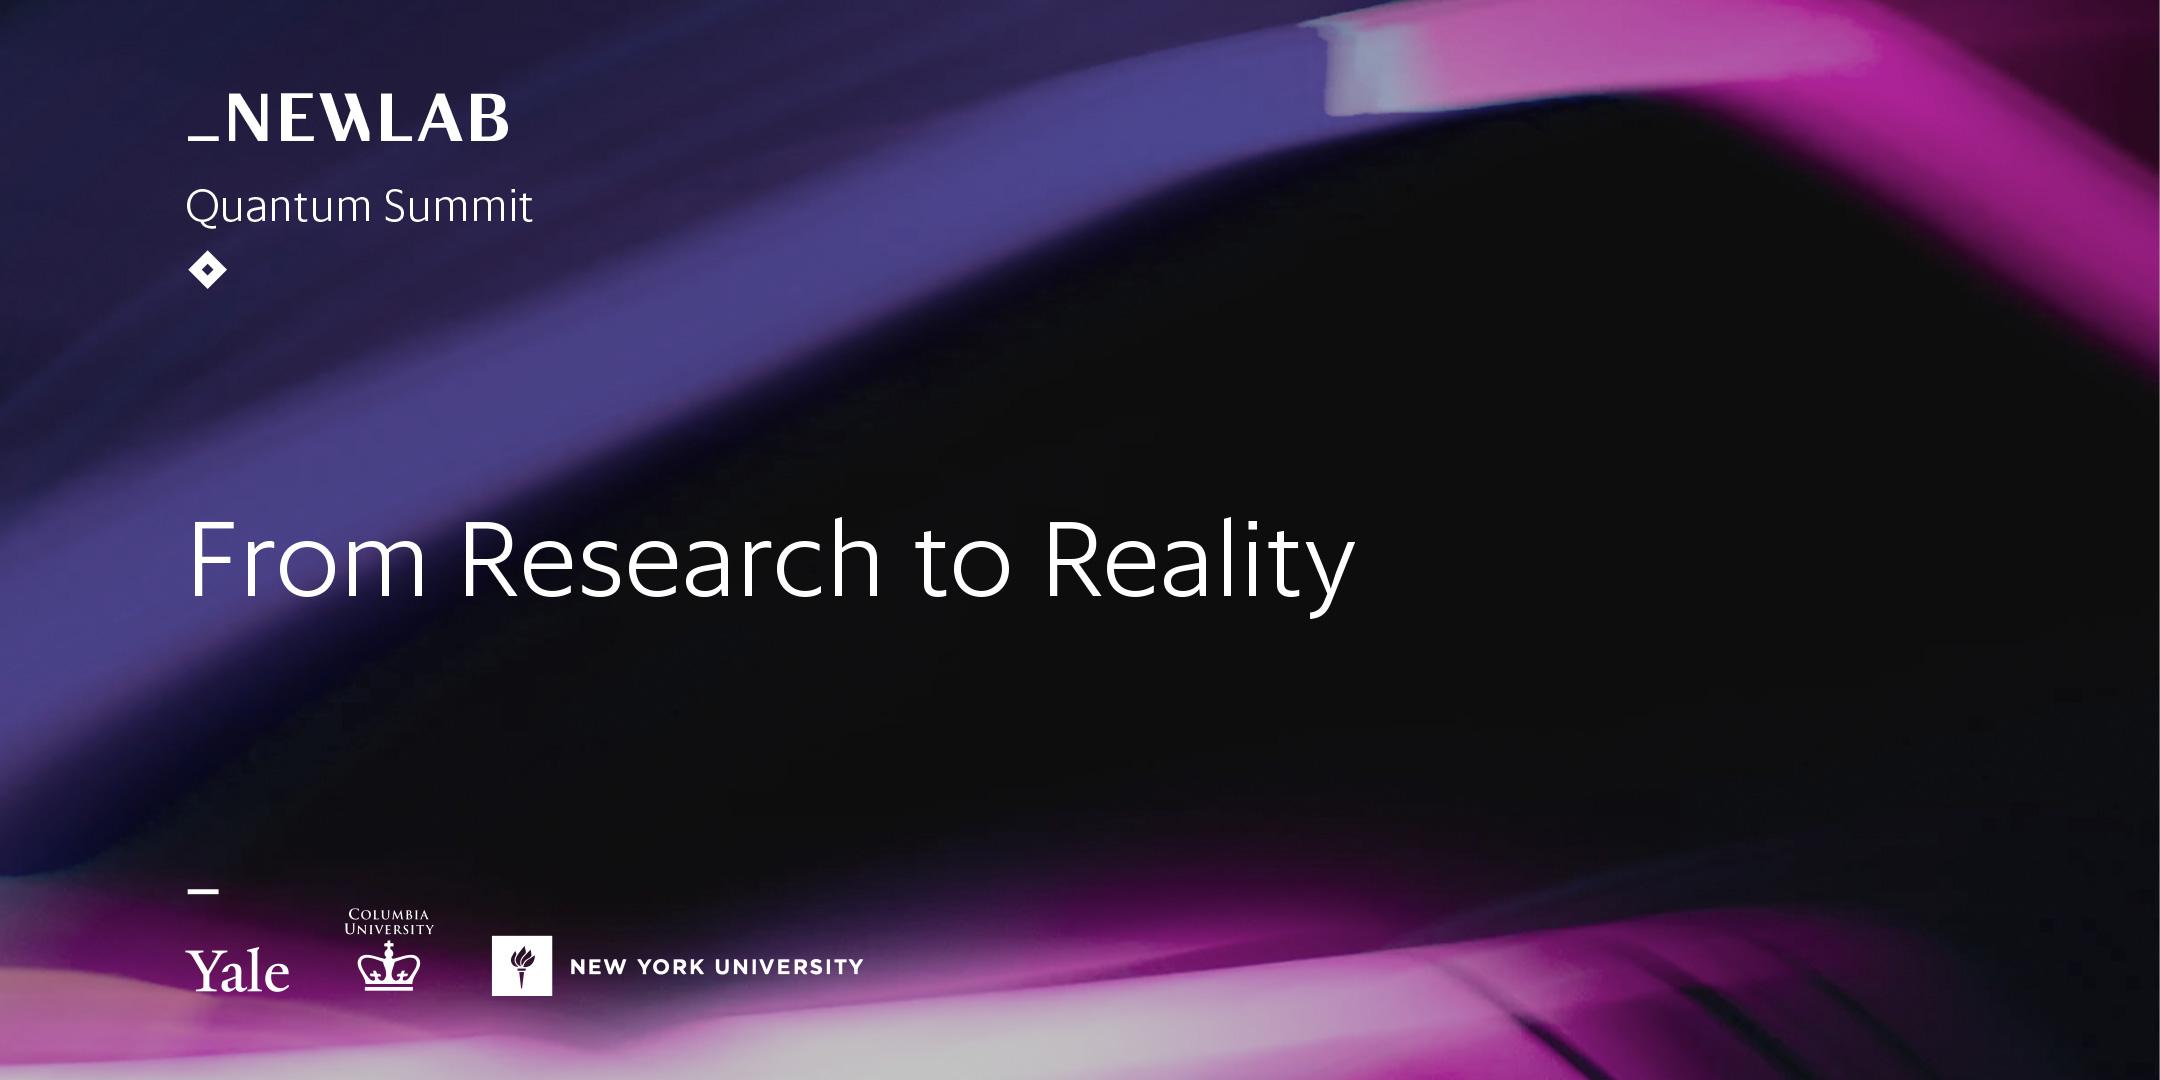 Quantum Summit: From Research to Reality